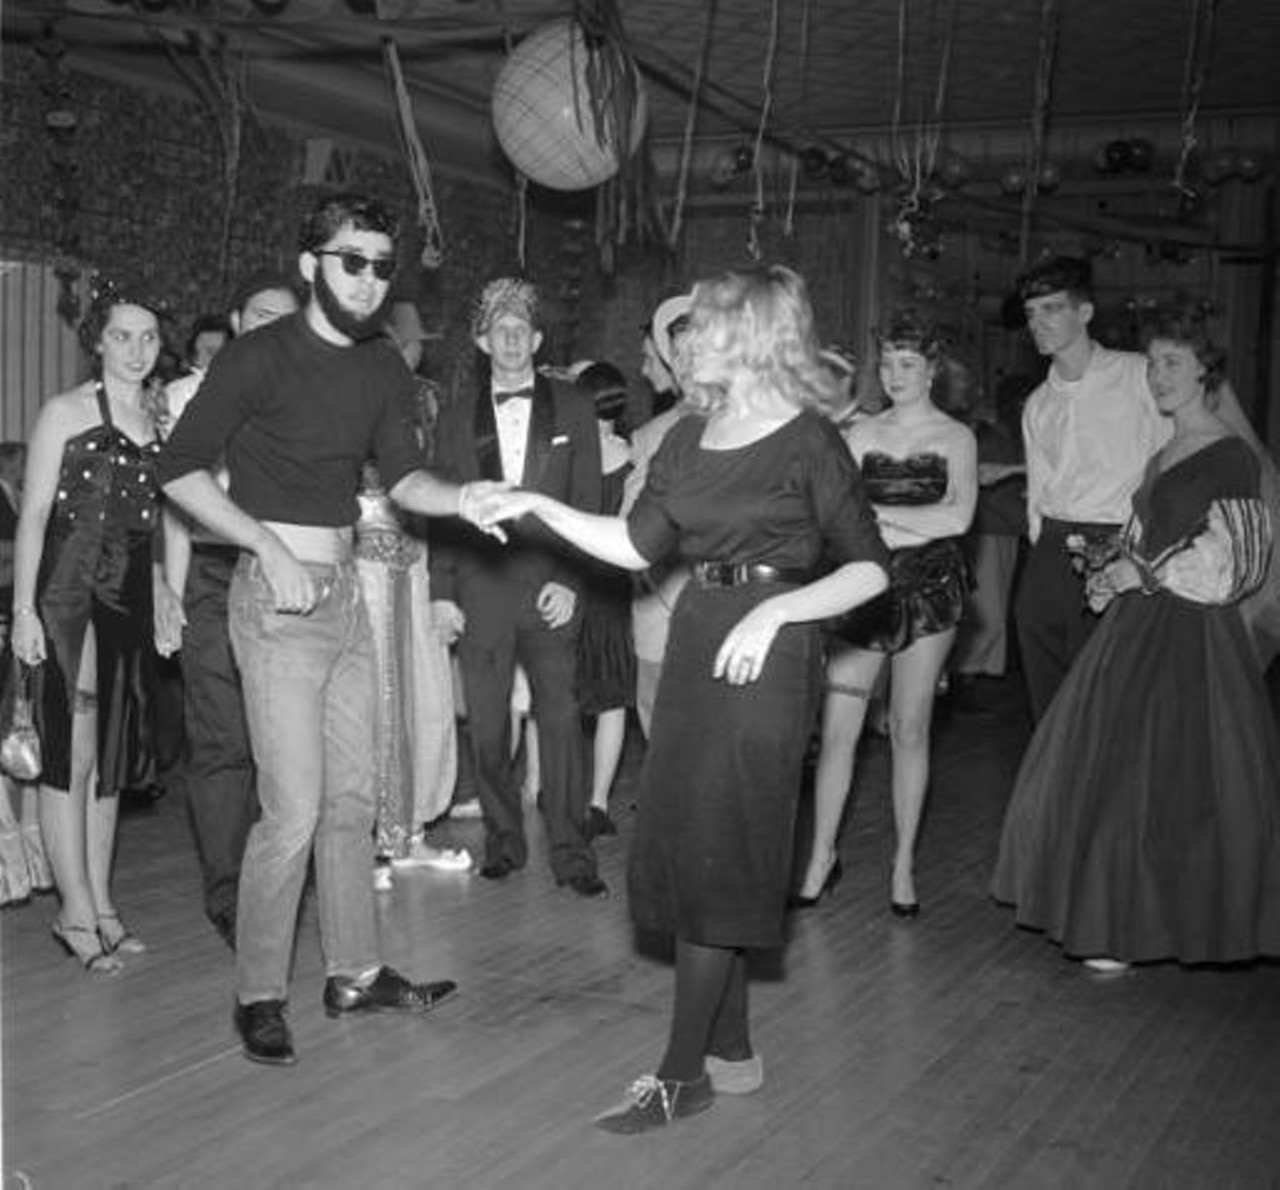 Dancers at Record Hop at Oak Hills Country Club, 1959
While sock hops were usually held in gyms and the term was coined for having to remove your shoes before dancing, “record hops” were a dance where you didn’t have to take off your shoes, usually because it wasn’t held on varnished floors.
Photo via Zintgraff Studio Photo Collection